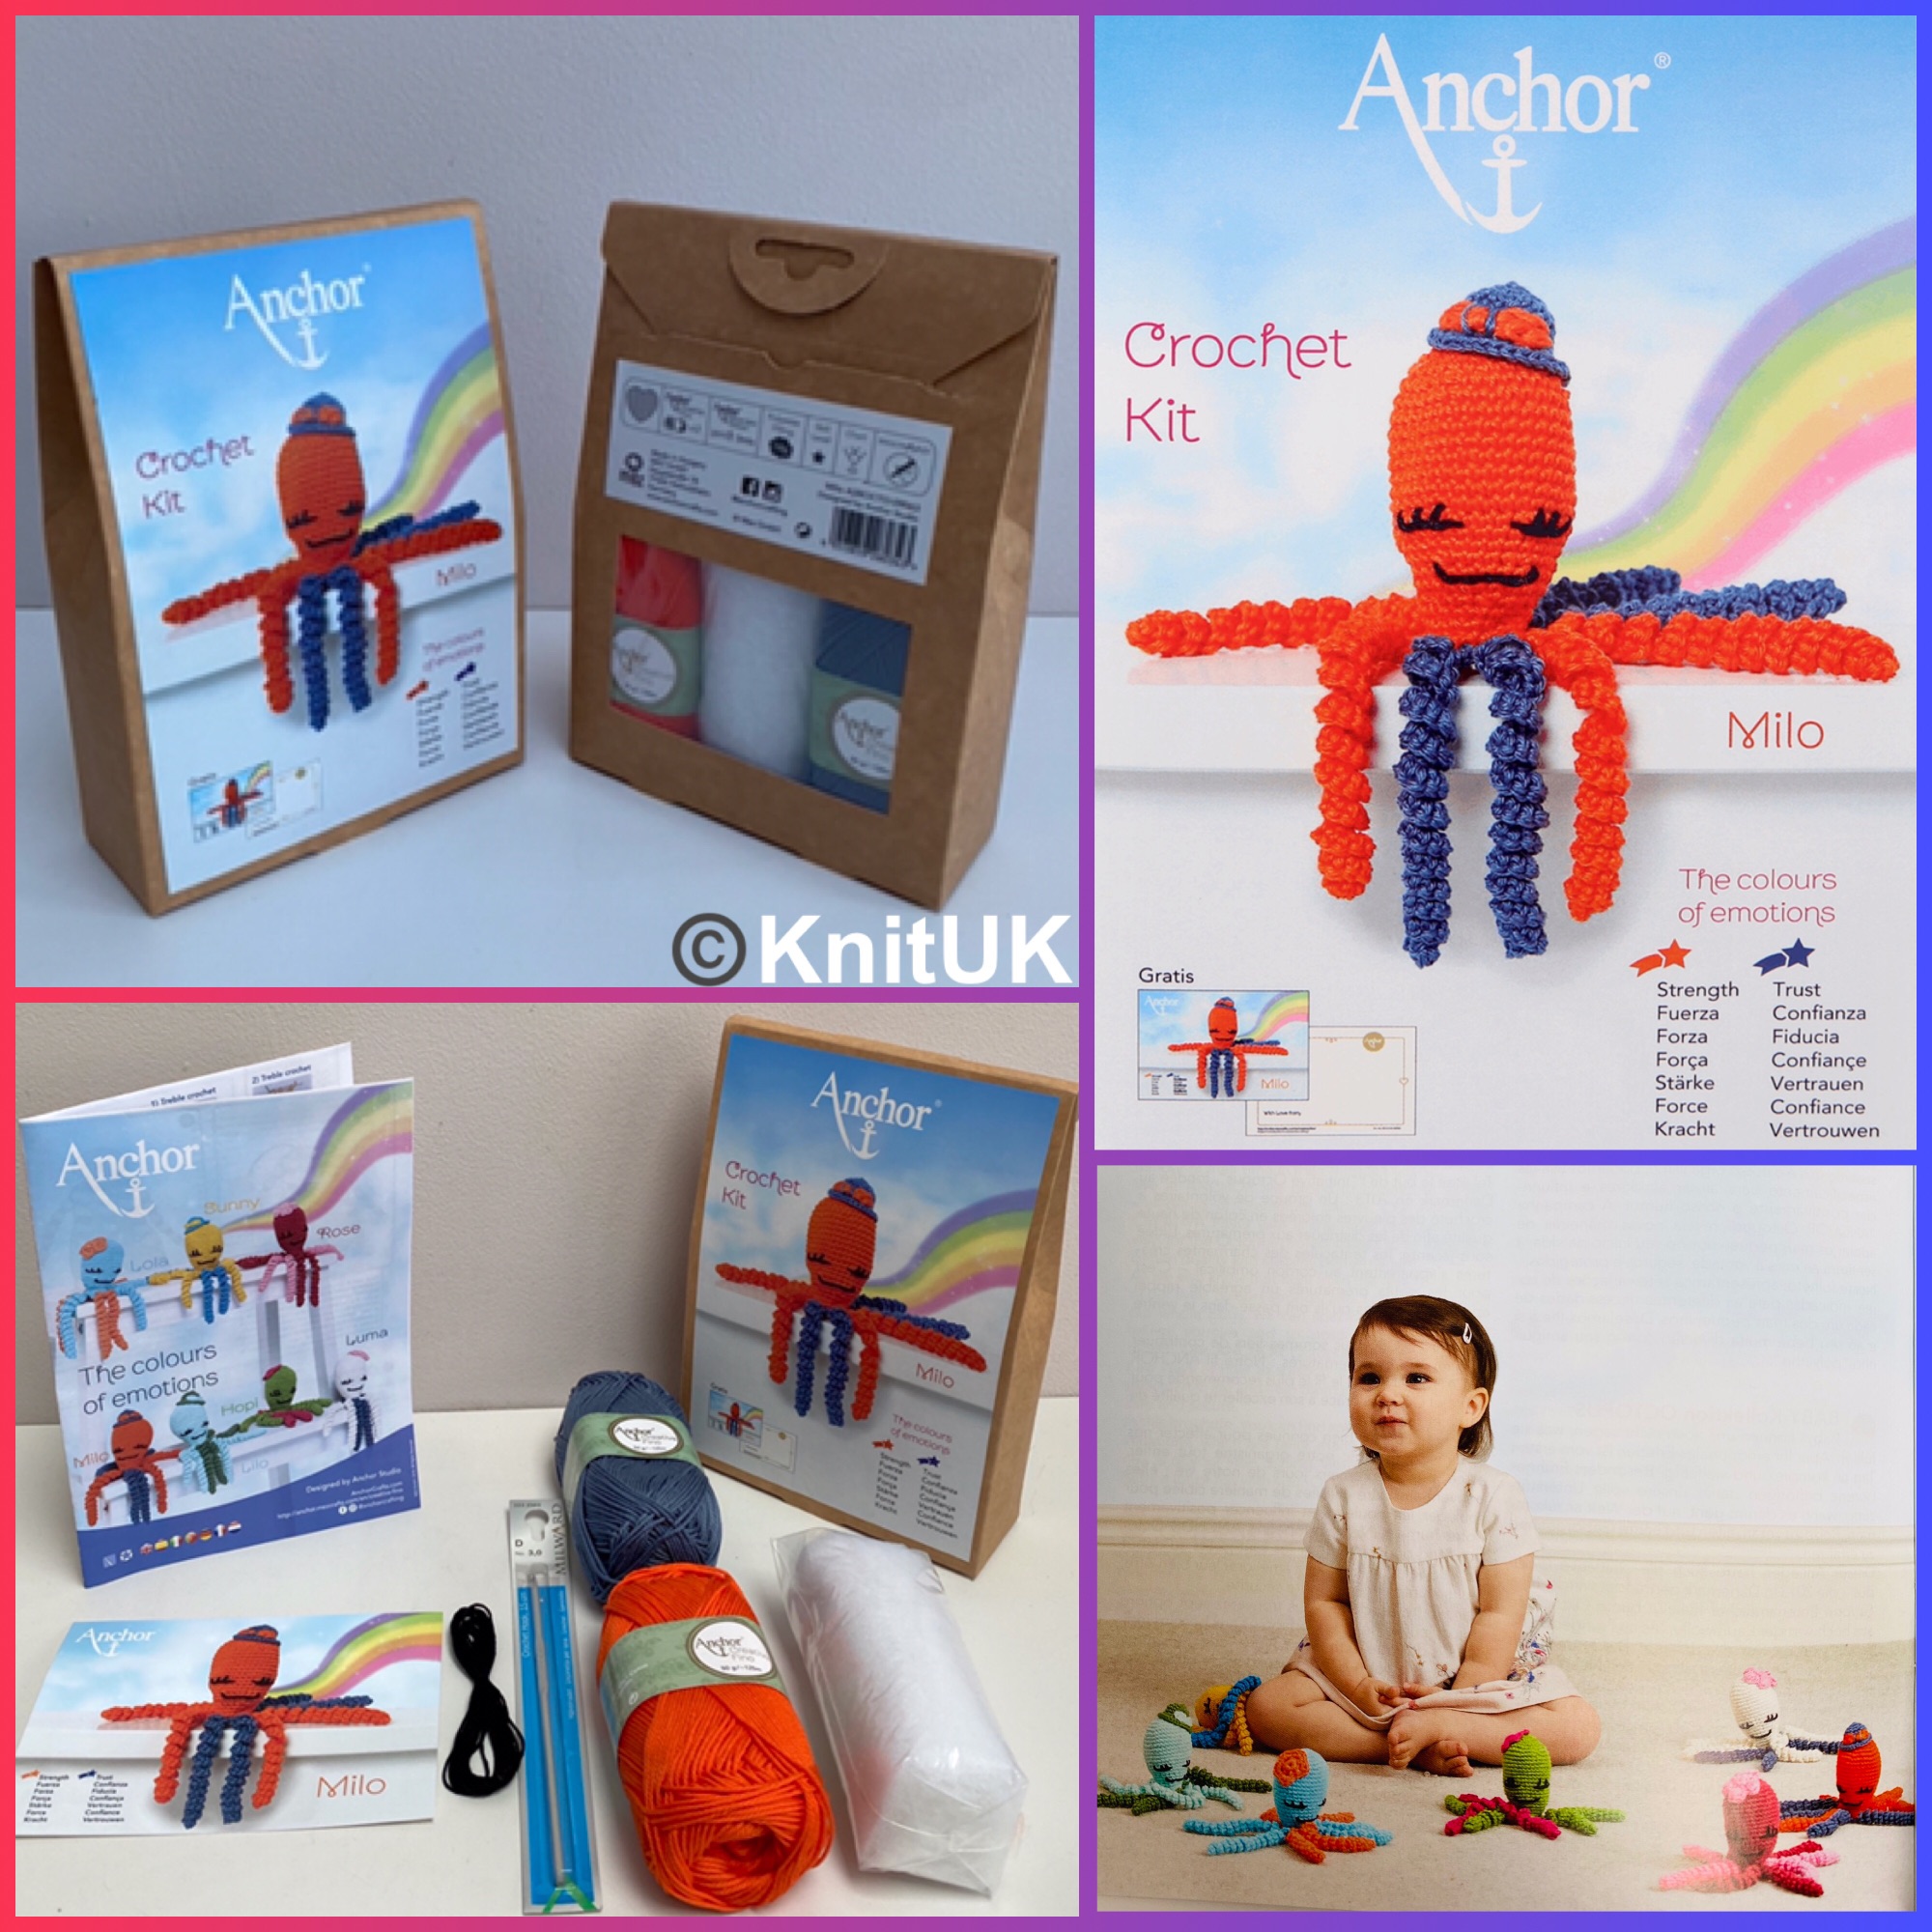 Anchor crochet kit octopus Milo the colours of emotions with orange dark bl